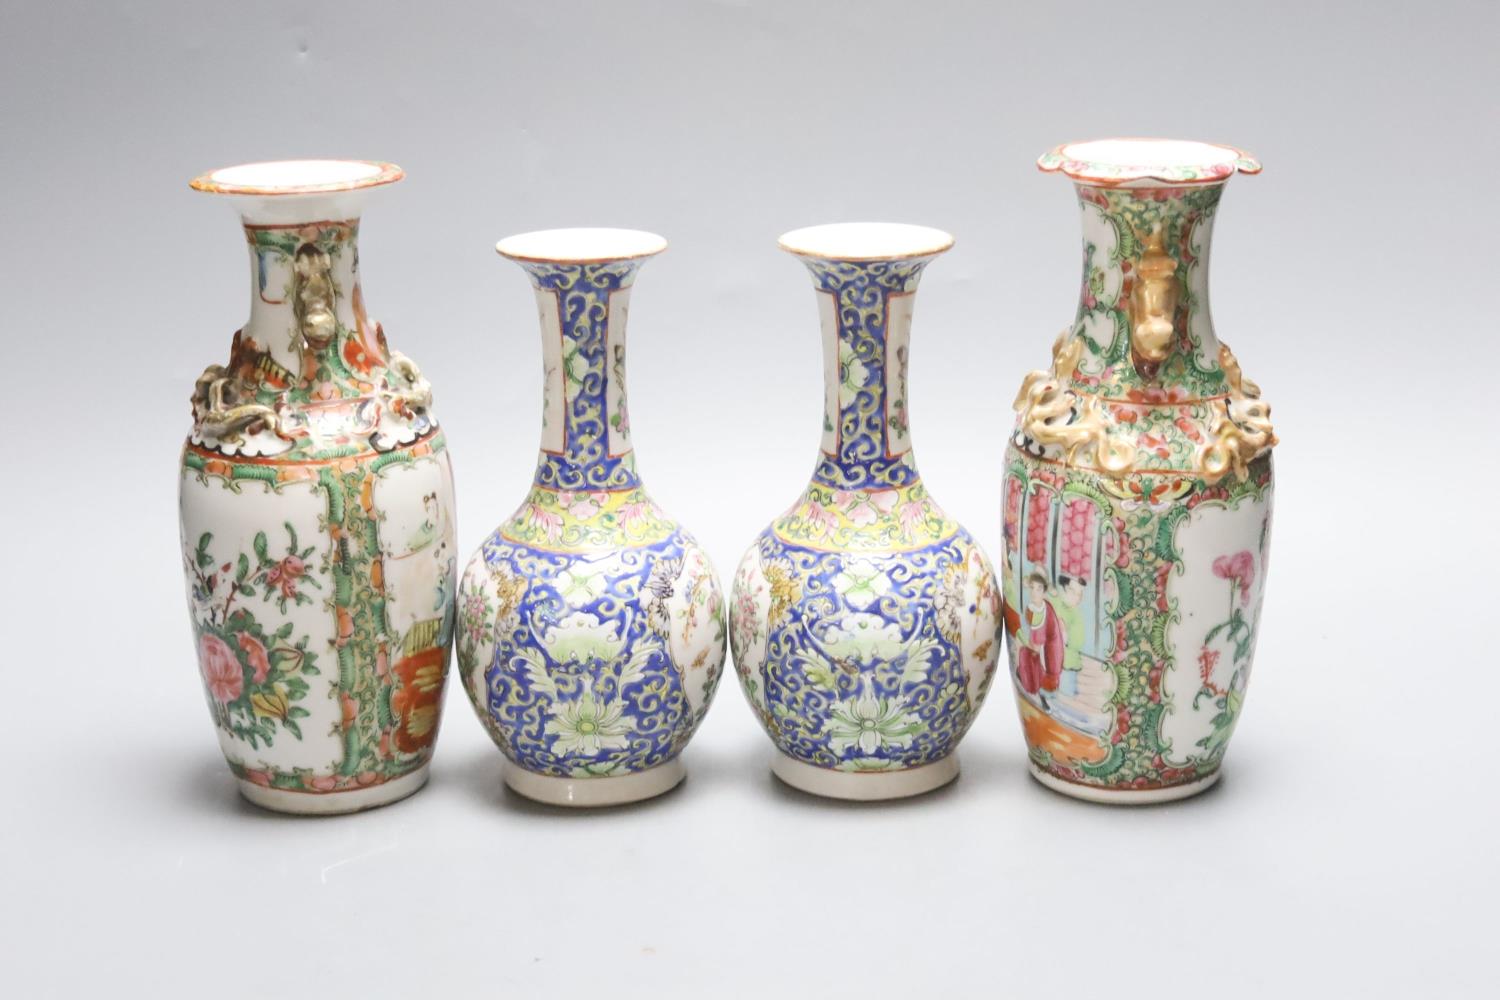 Four 19th century Chinese famille rose vases, 21cm - Image 2 of 3